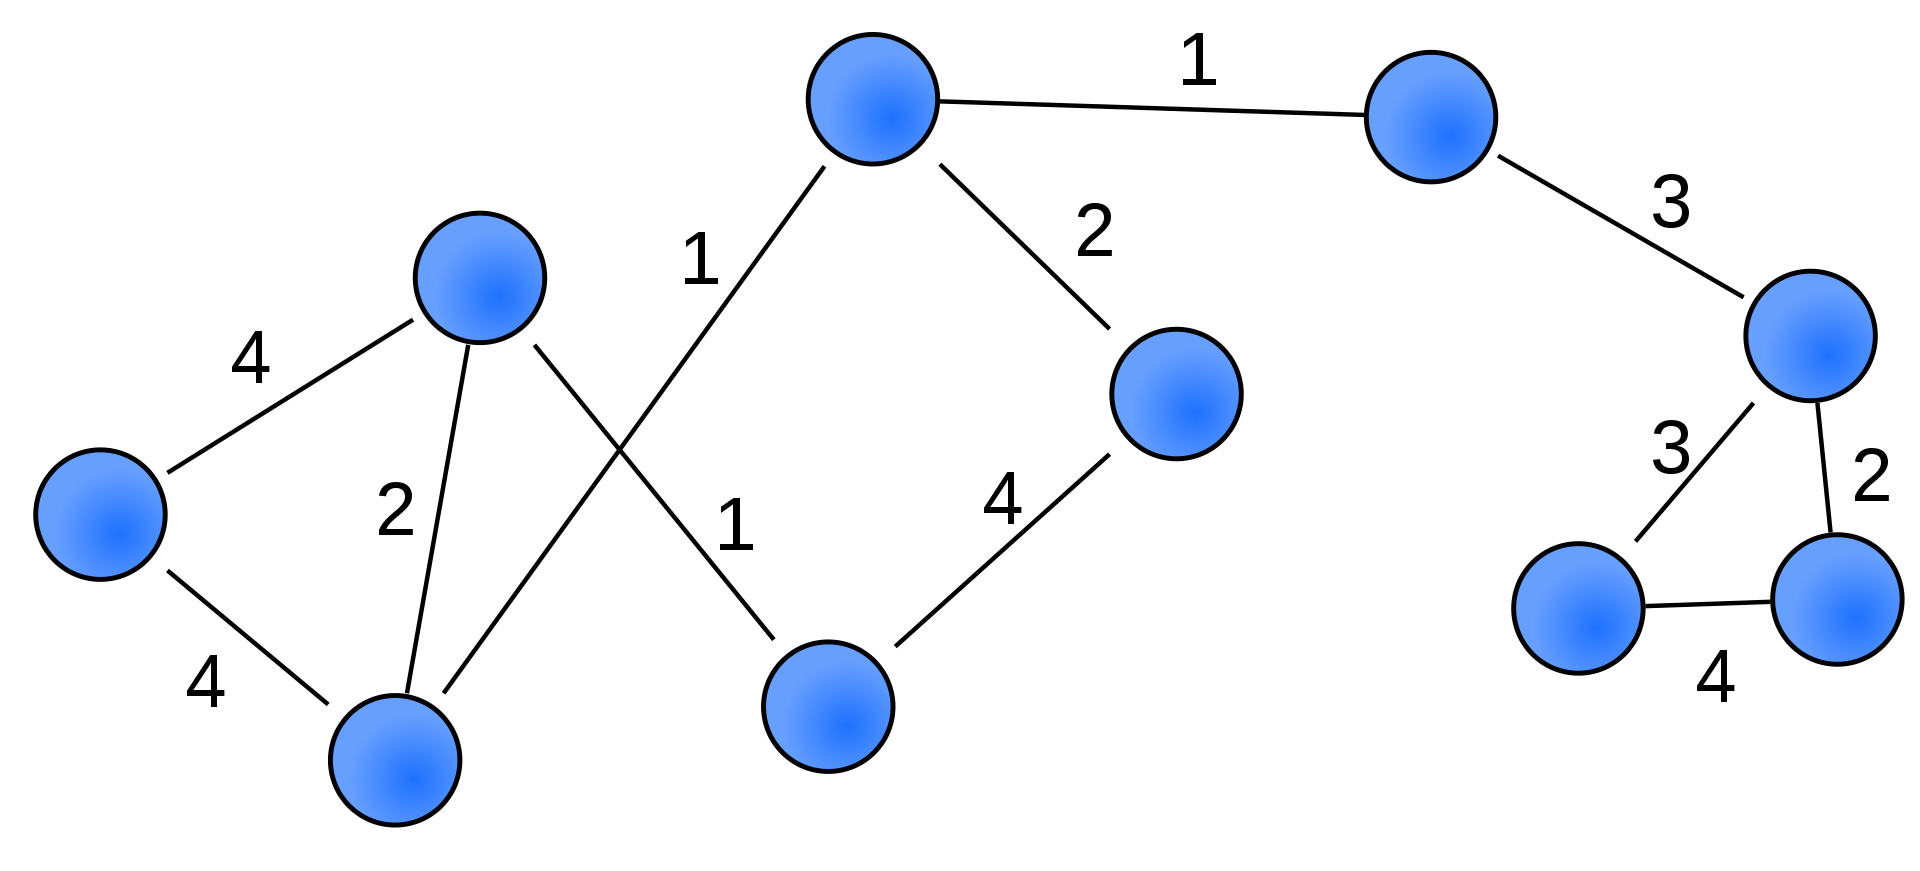 A visualization of a graph with several colored nodes. Some nodes are connected with lines which are labeled by numbers